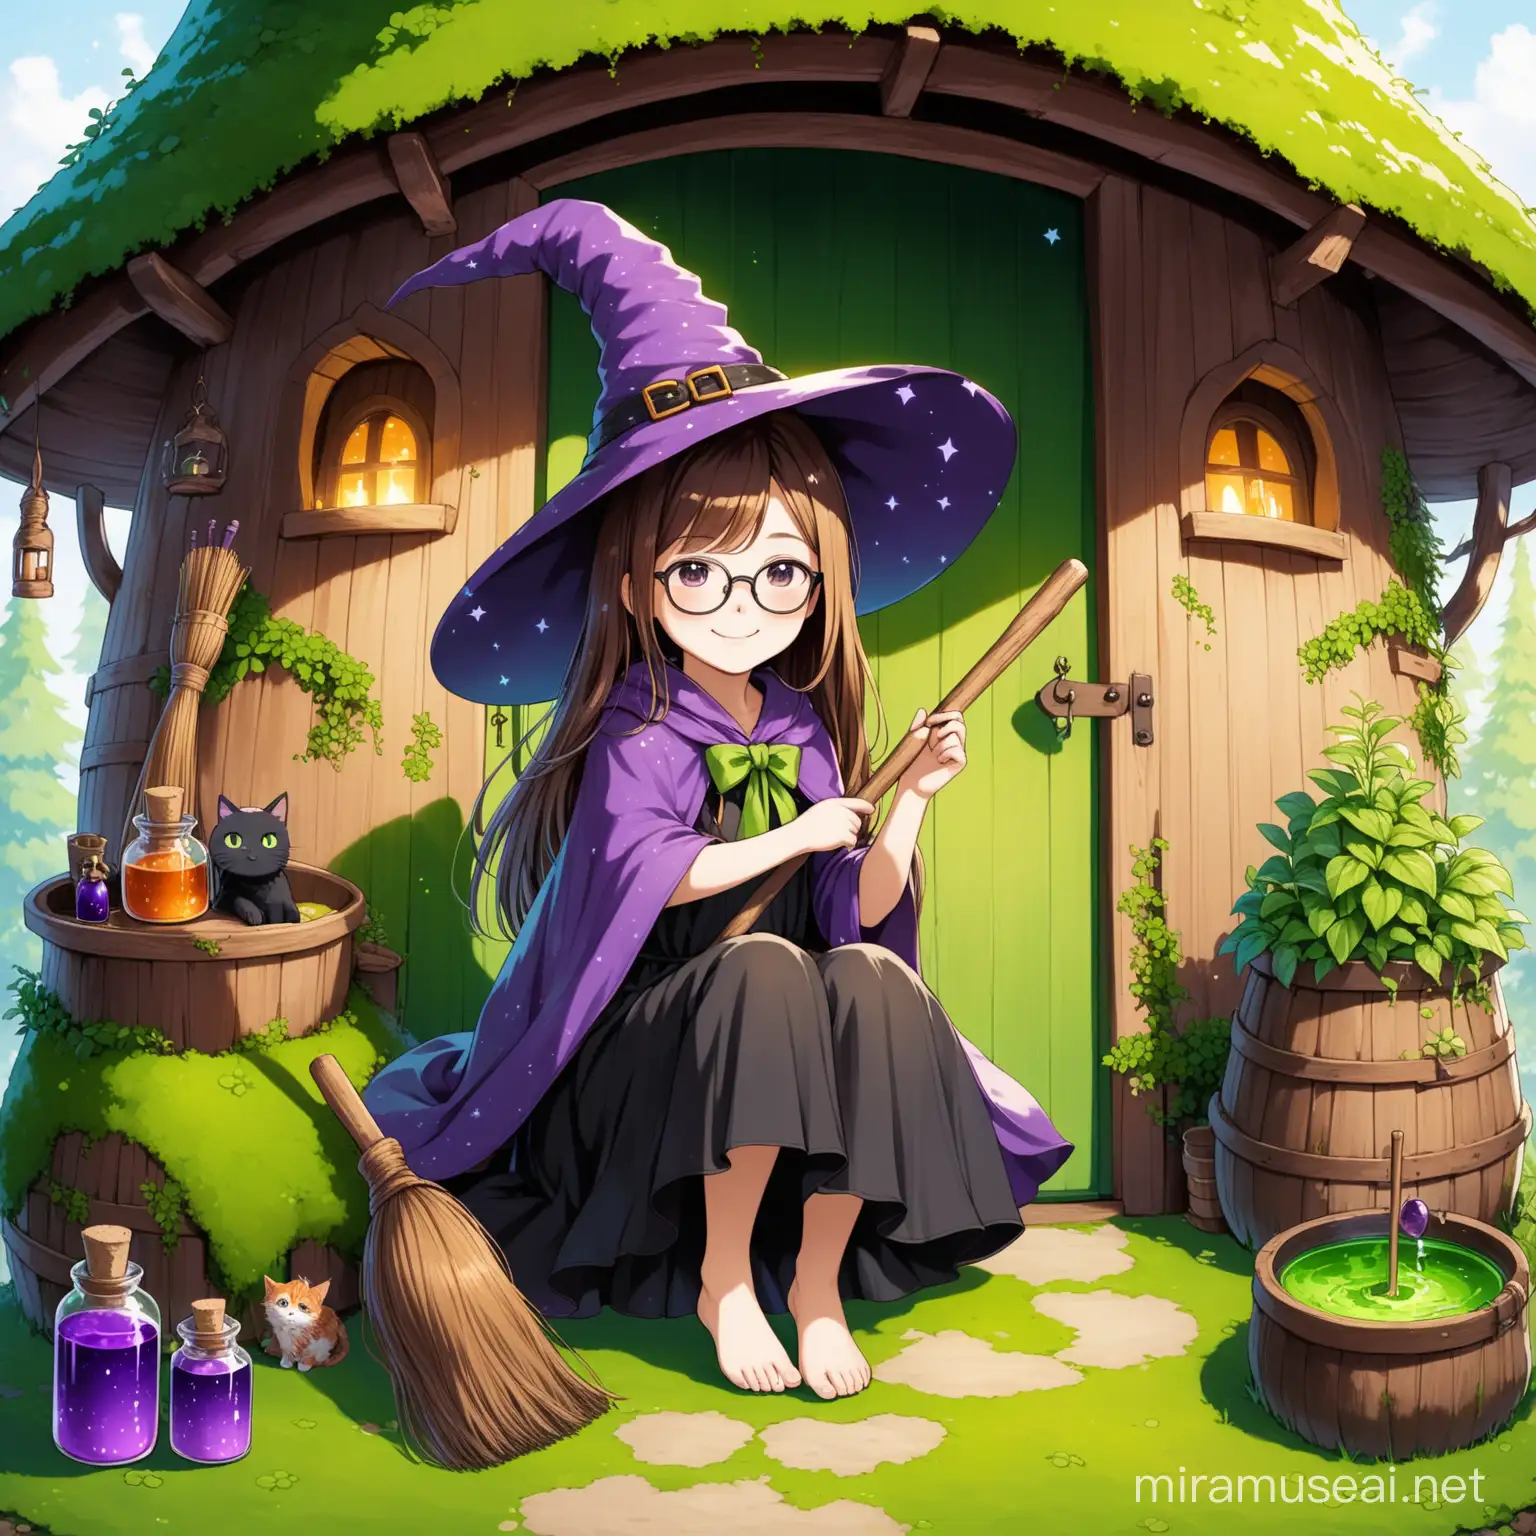 11 year old girl, purple witches hat, long green cloak, long brown flowy hair, good witches hut, herbs, green top, black skirt, bare foot, moss, potions, smiling, holding a broom, black glasses, rag doll cat at her feet, 